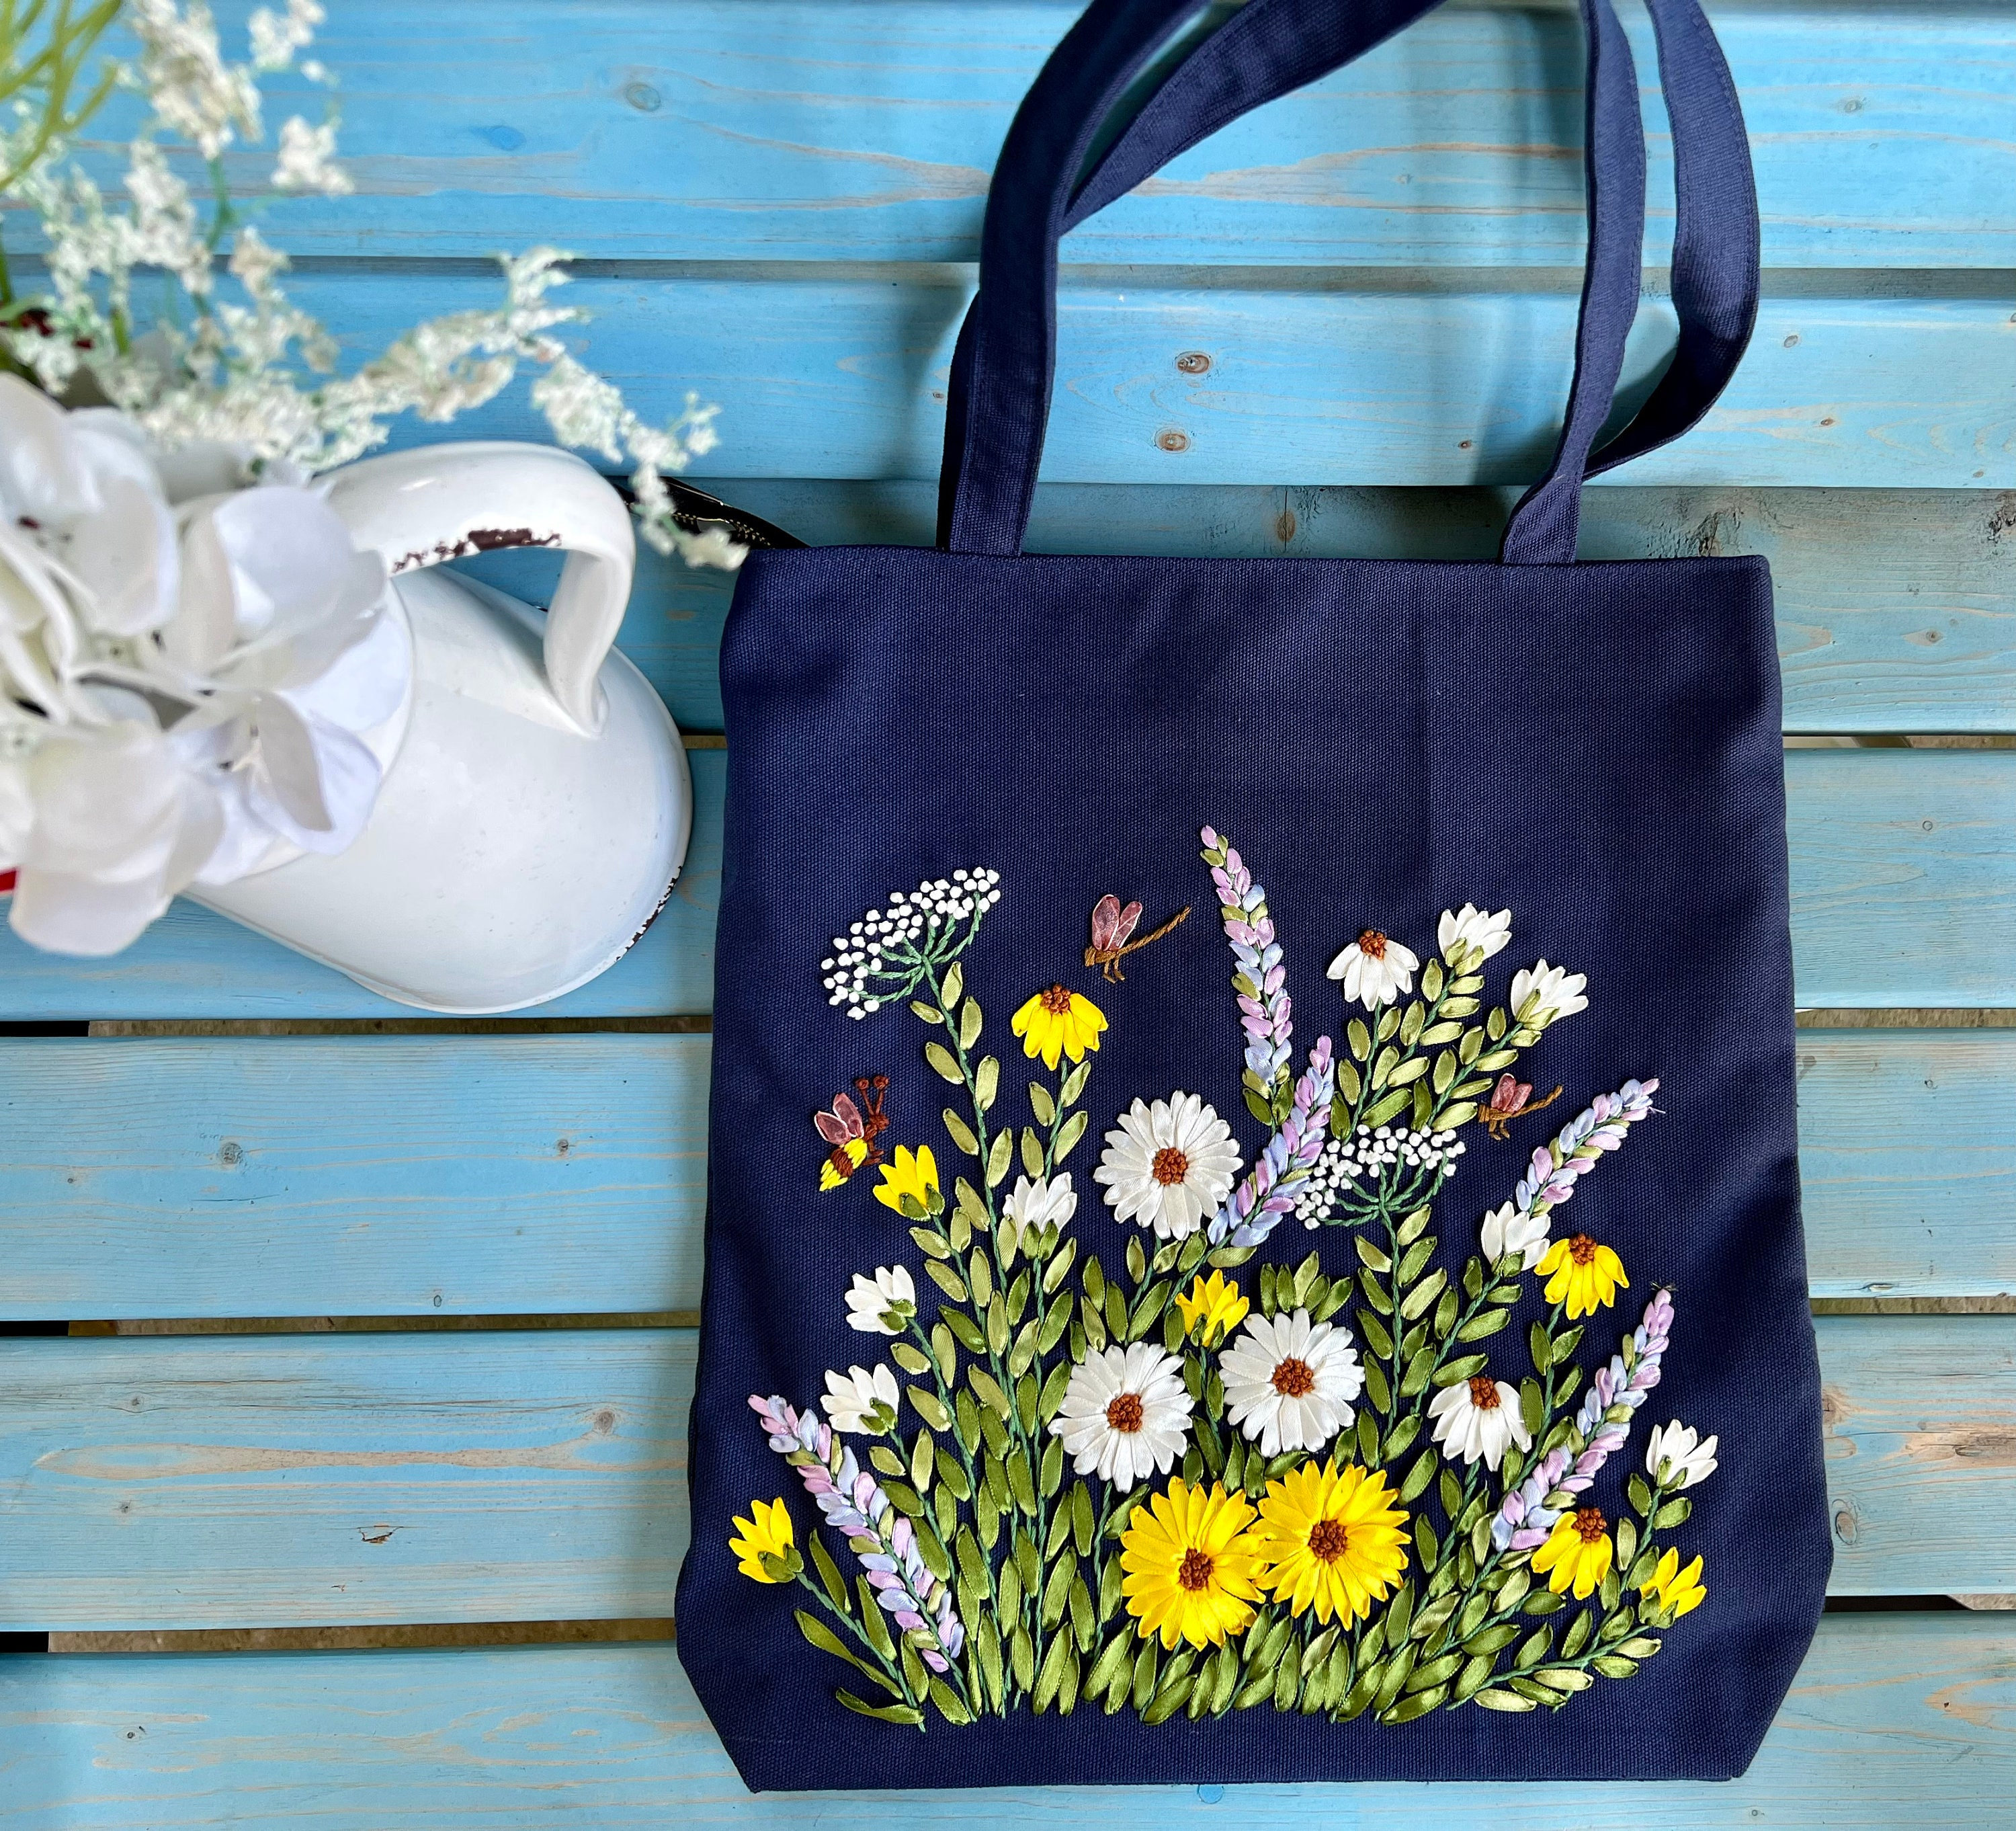 Artful Handmade 3D RIBBON Embroidery Canvas Tote Bag, Beautiful DAISY Embroidery  Tote Bag. Navy Blue Shoulder Tote Bag 